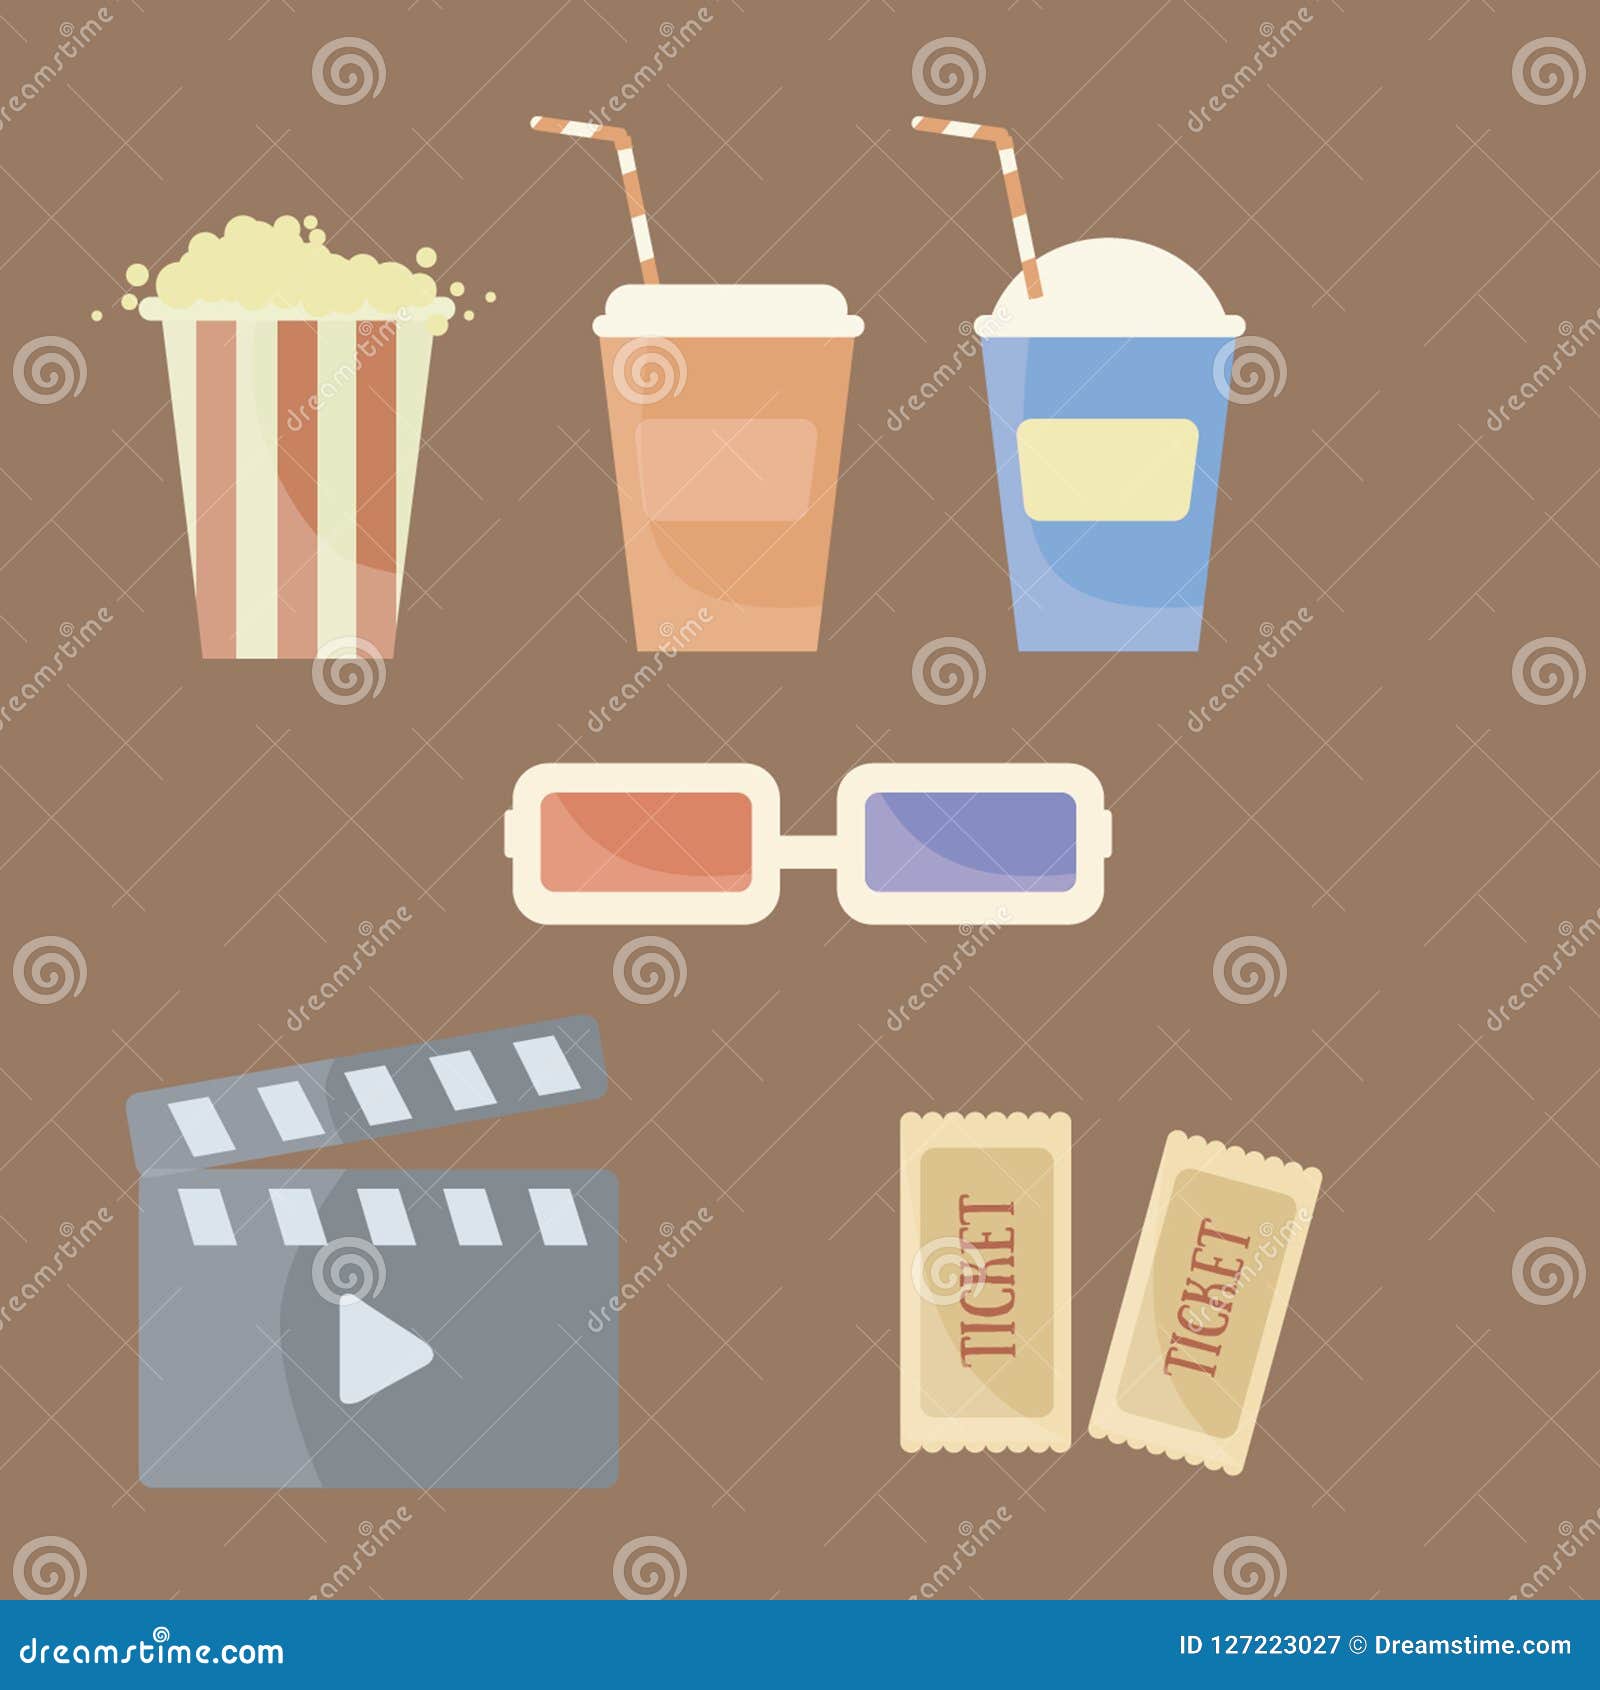 set of objects for cinema